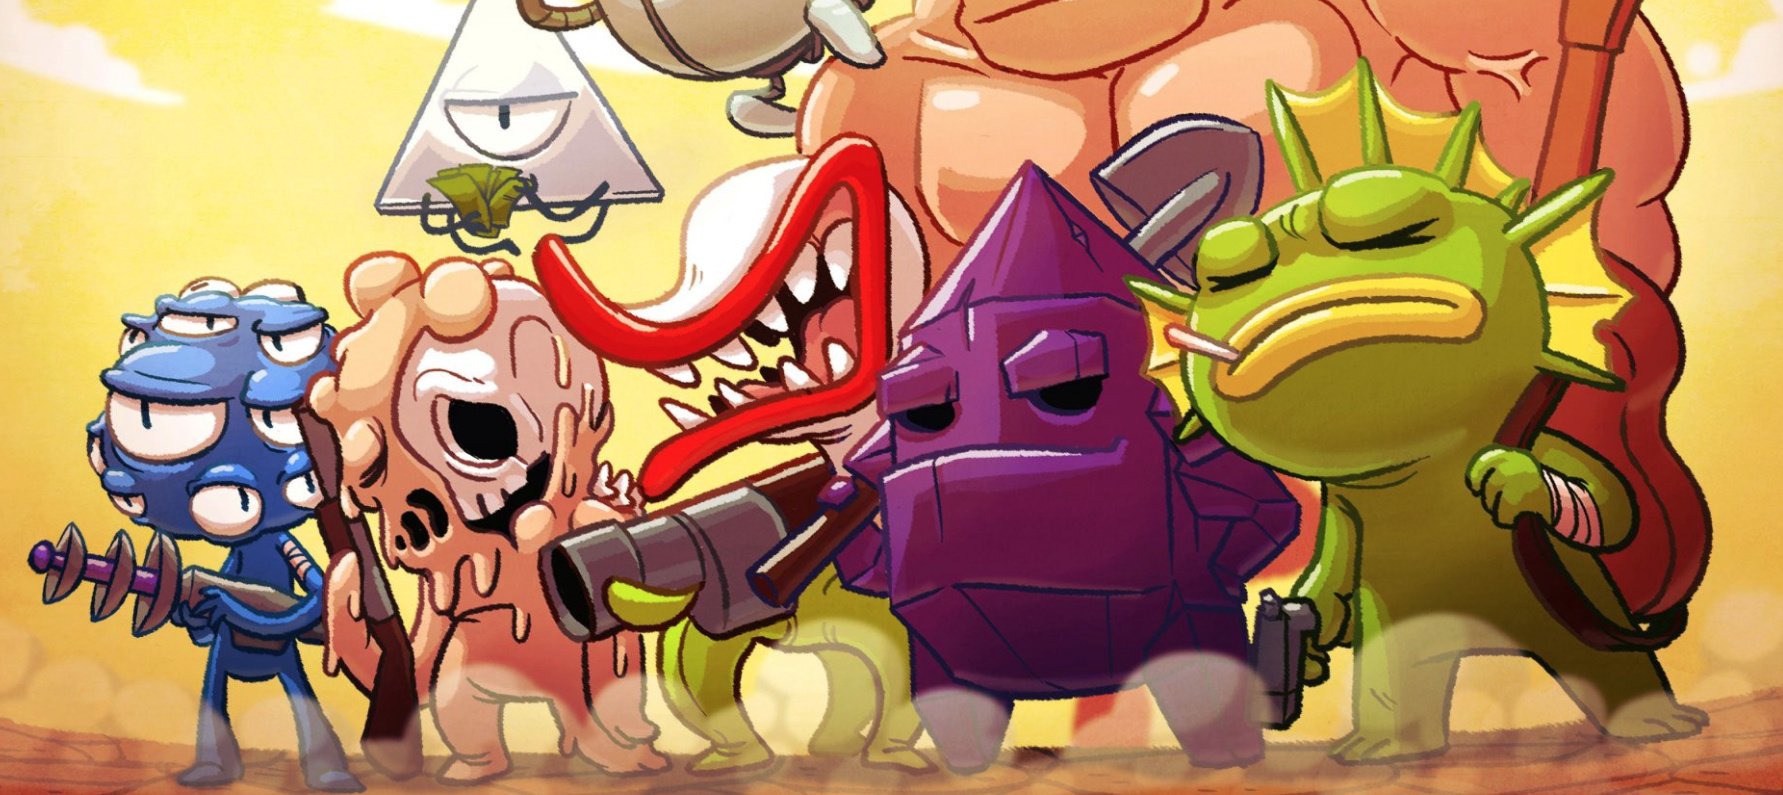 free download nuclear throne nintendo switch